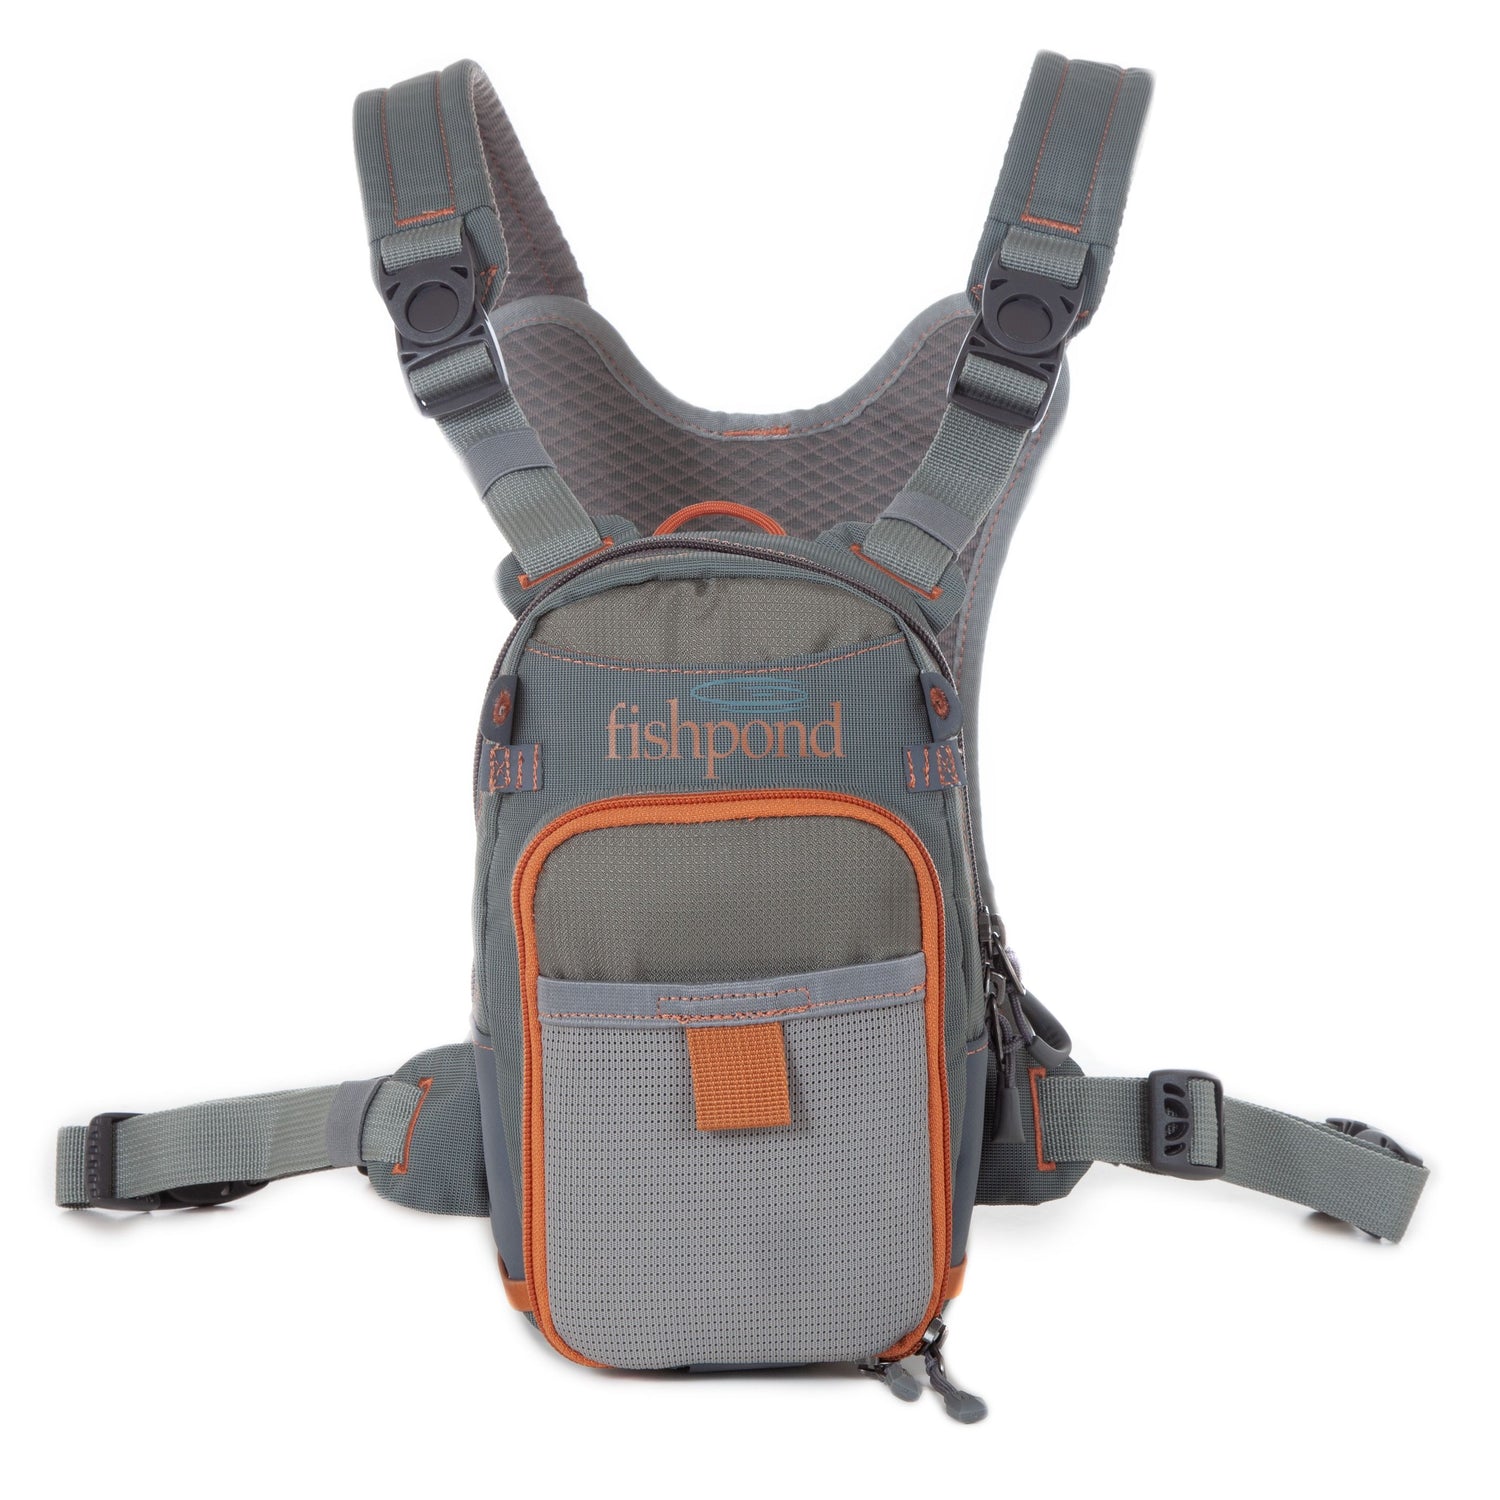 Wind River Roll-Top Dry Backpack – Fishpond